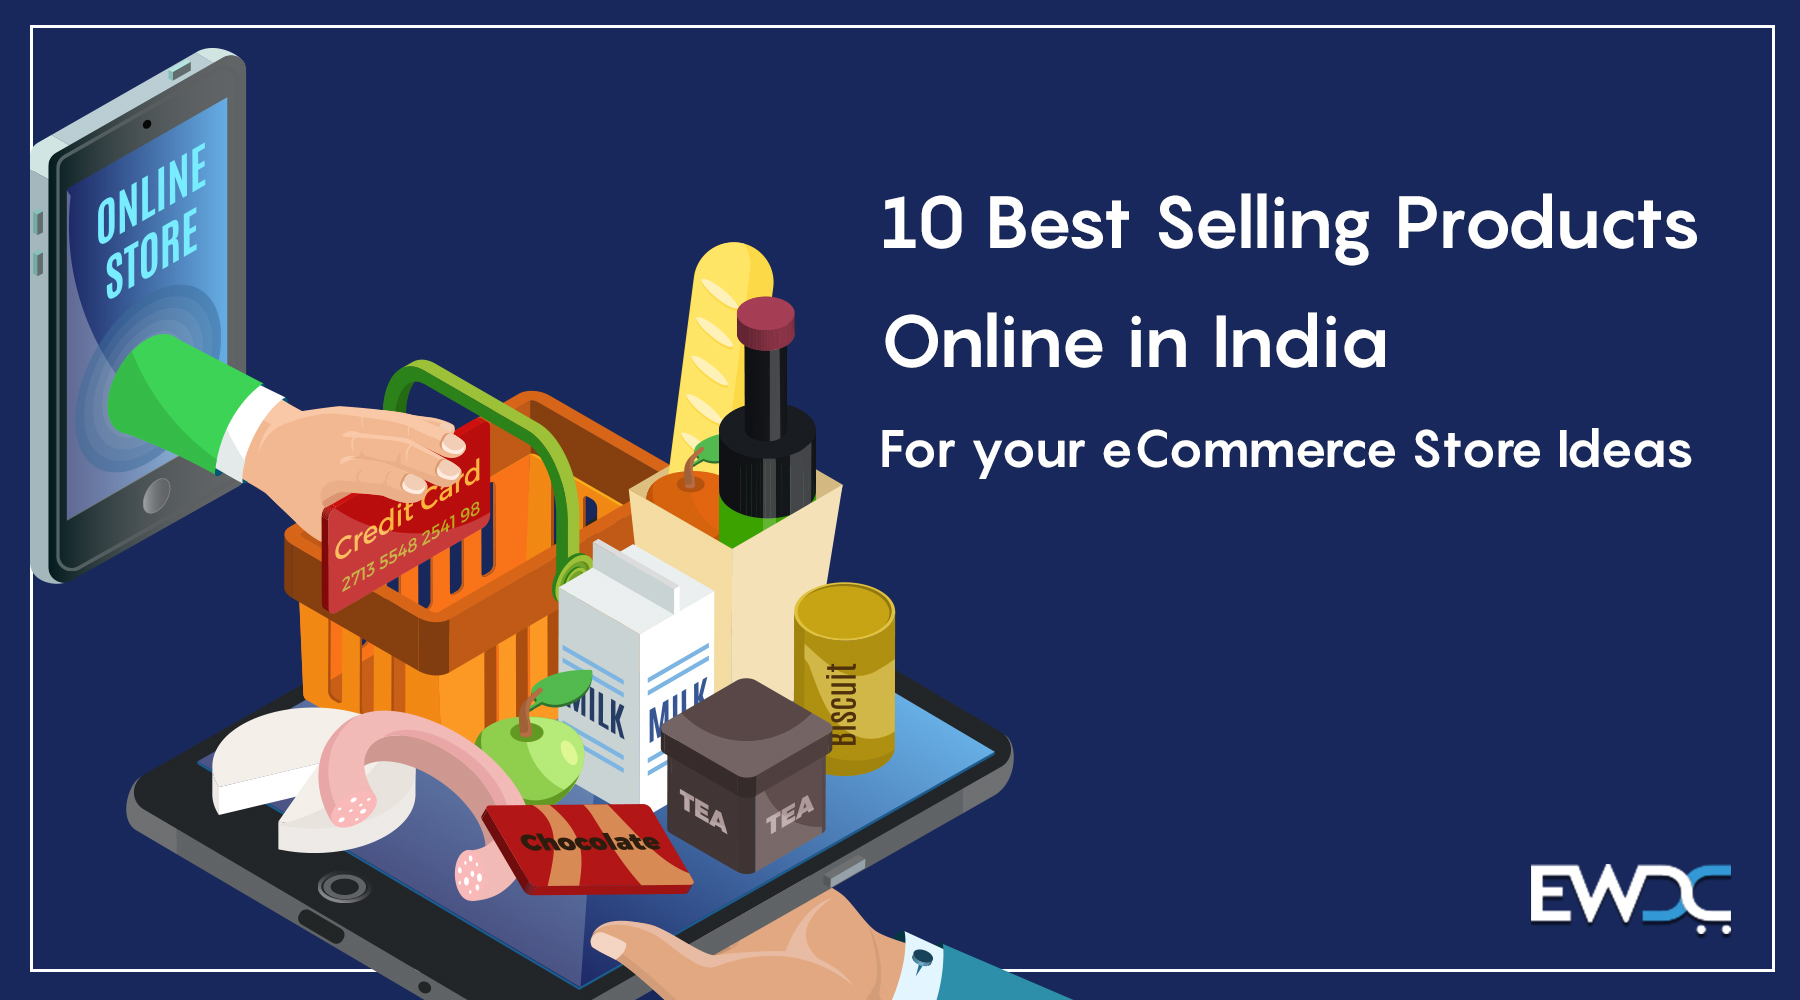 Top 10 Most Demanded & Top Selling Products In India Online